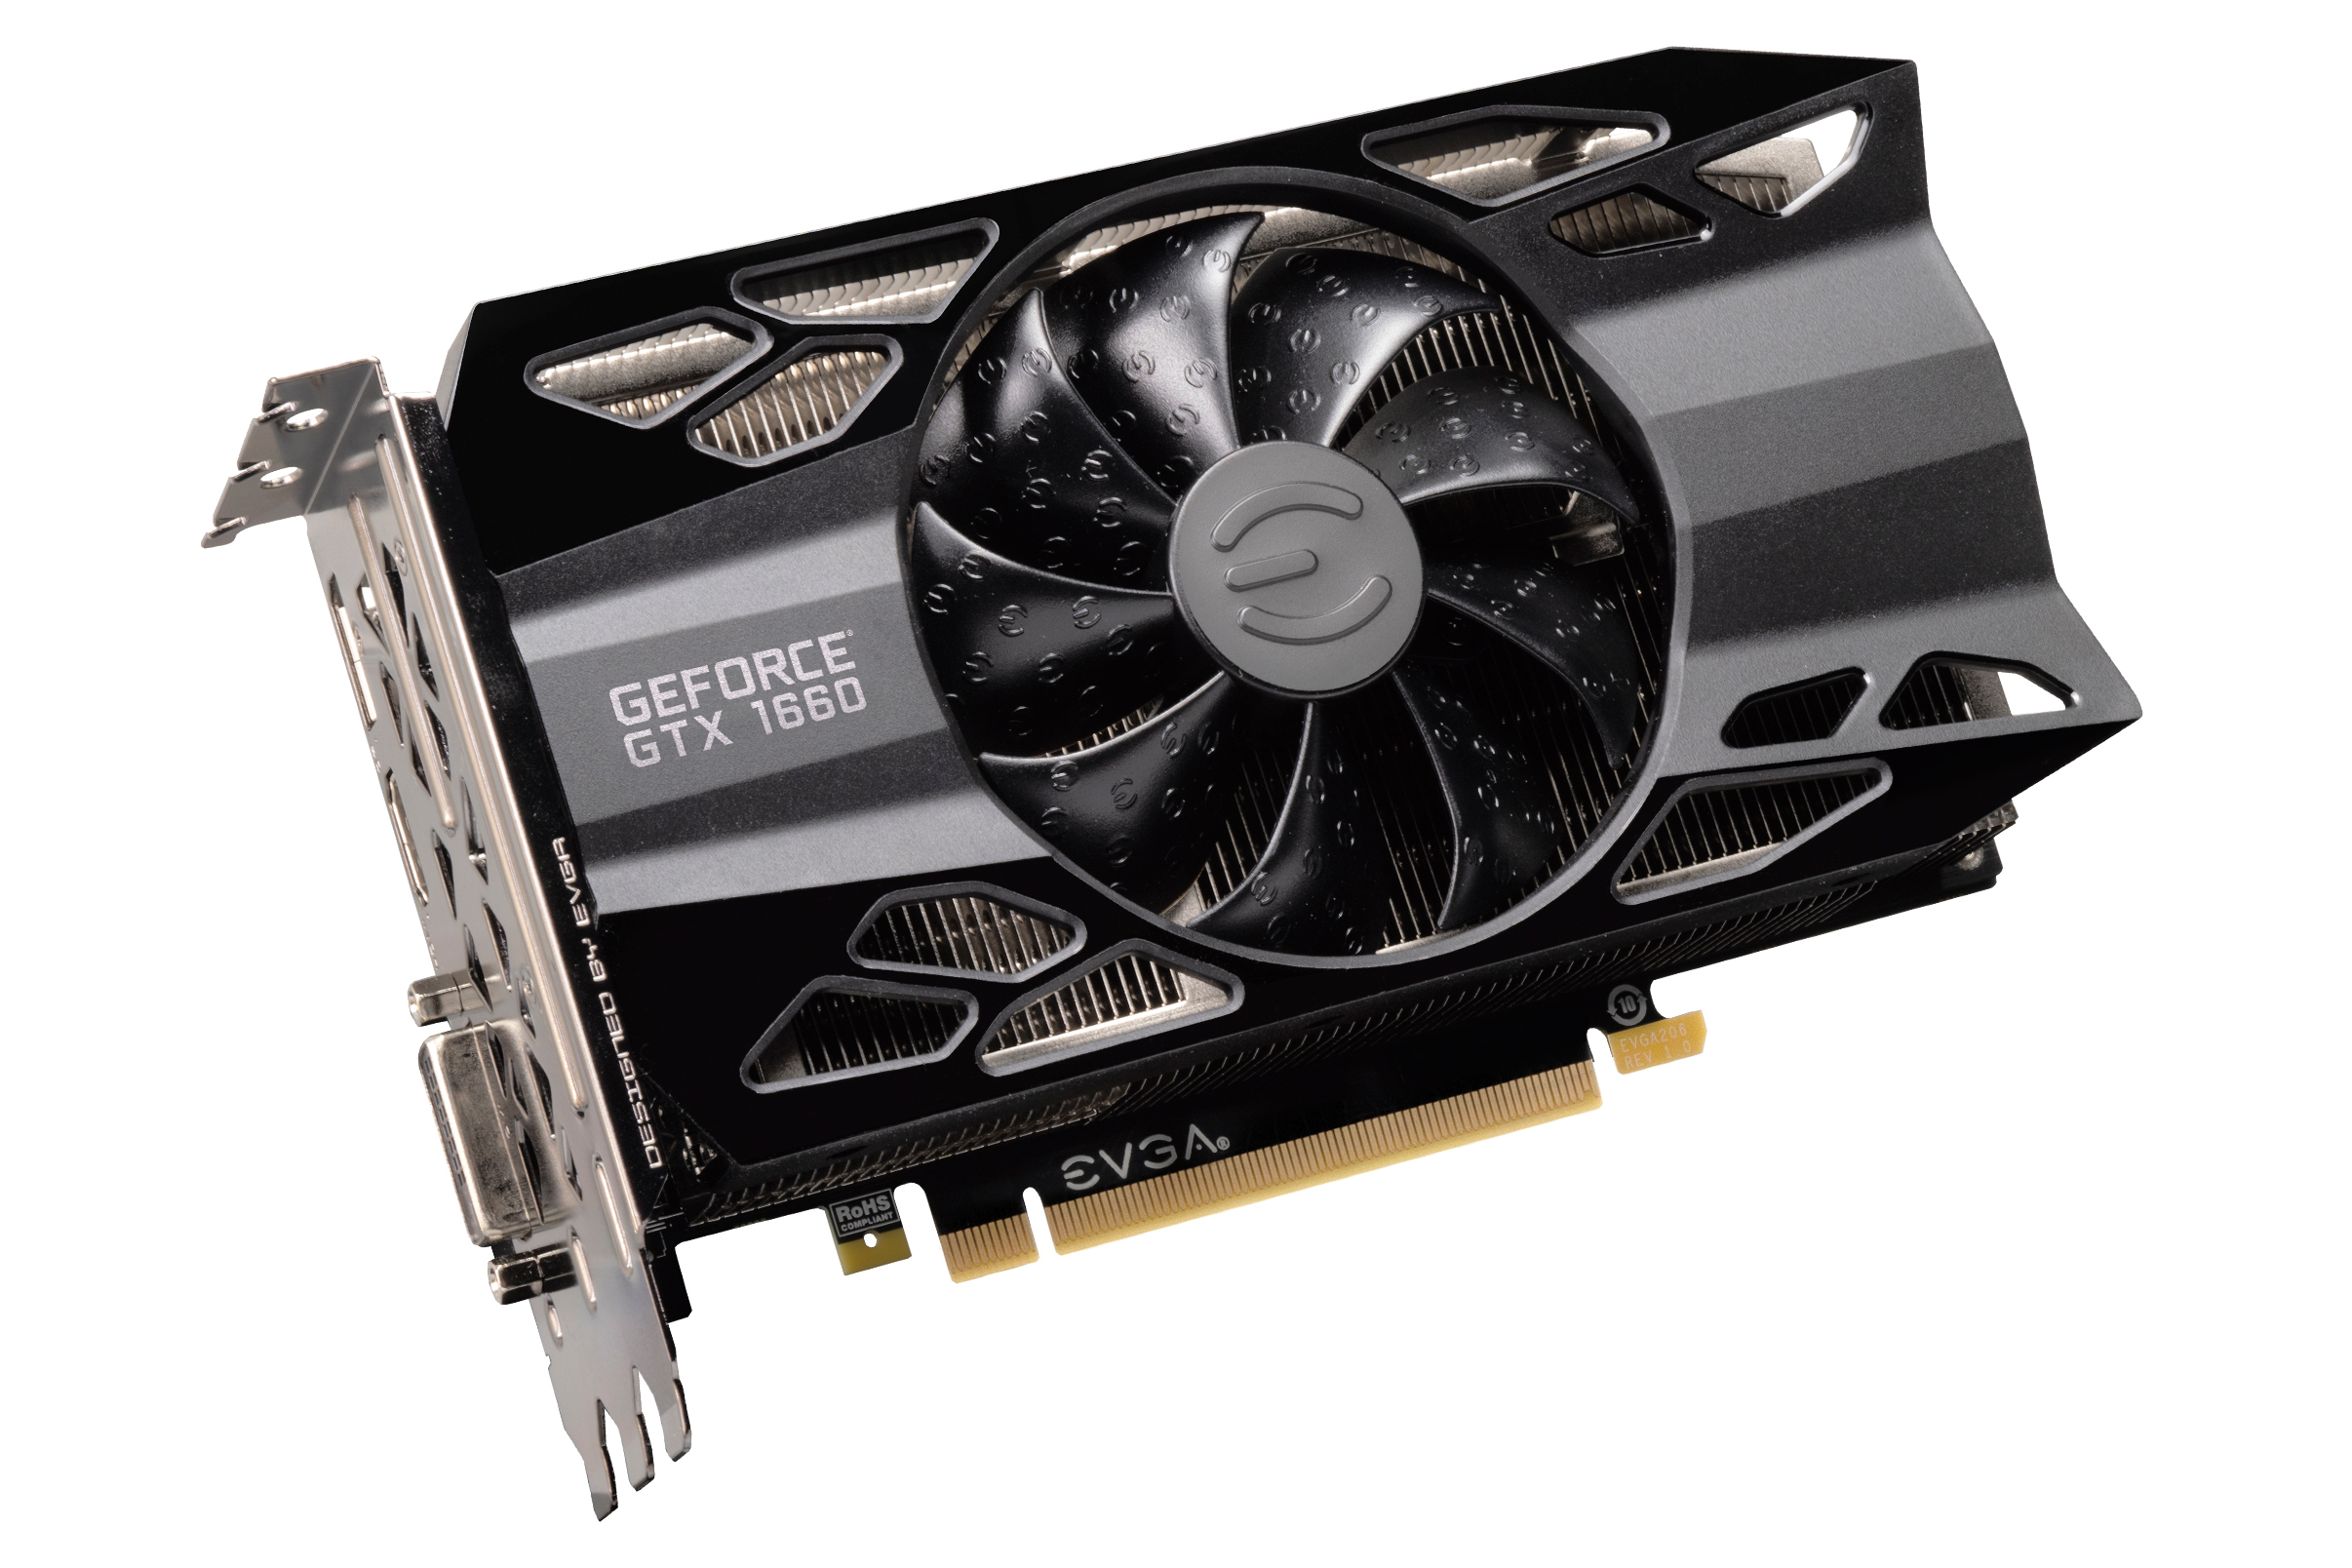 Meet the EVGA GeForce GTX 1660 XC Black - The GeForce GTX 1660 Review, Feat. XC Turing Stakes Its at $219